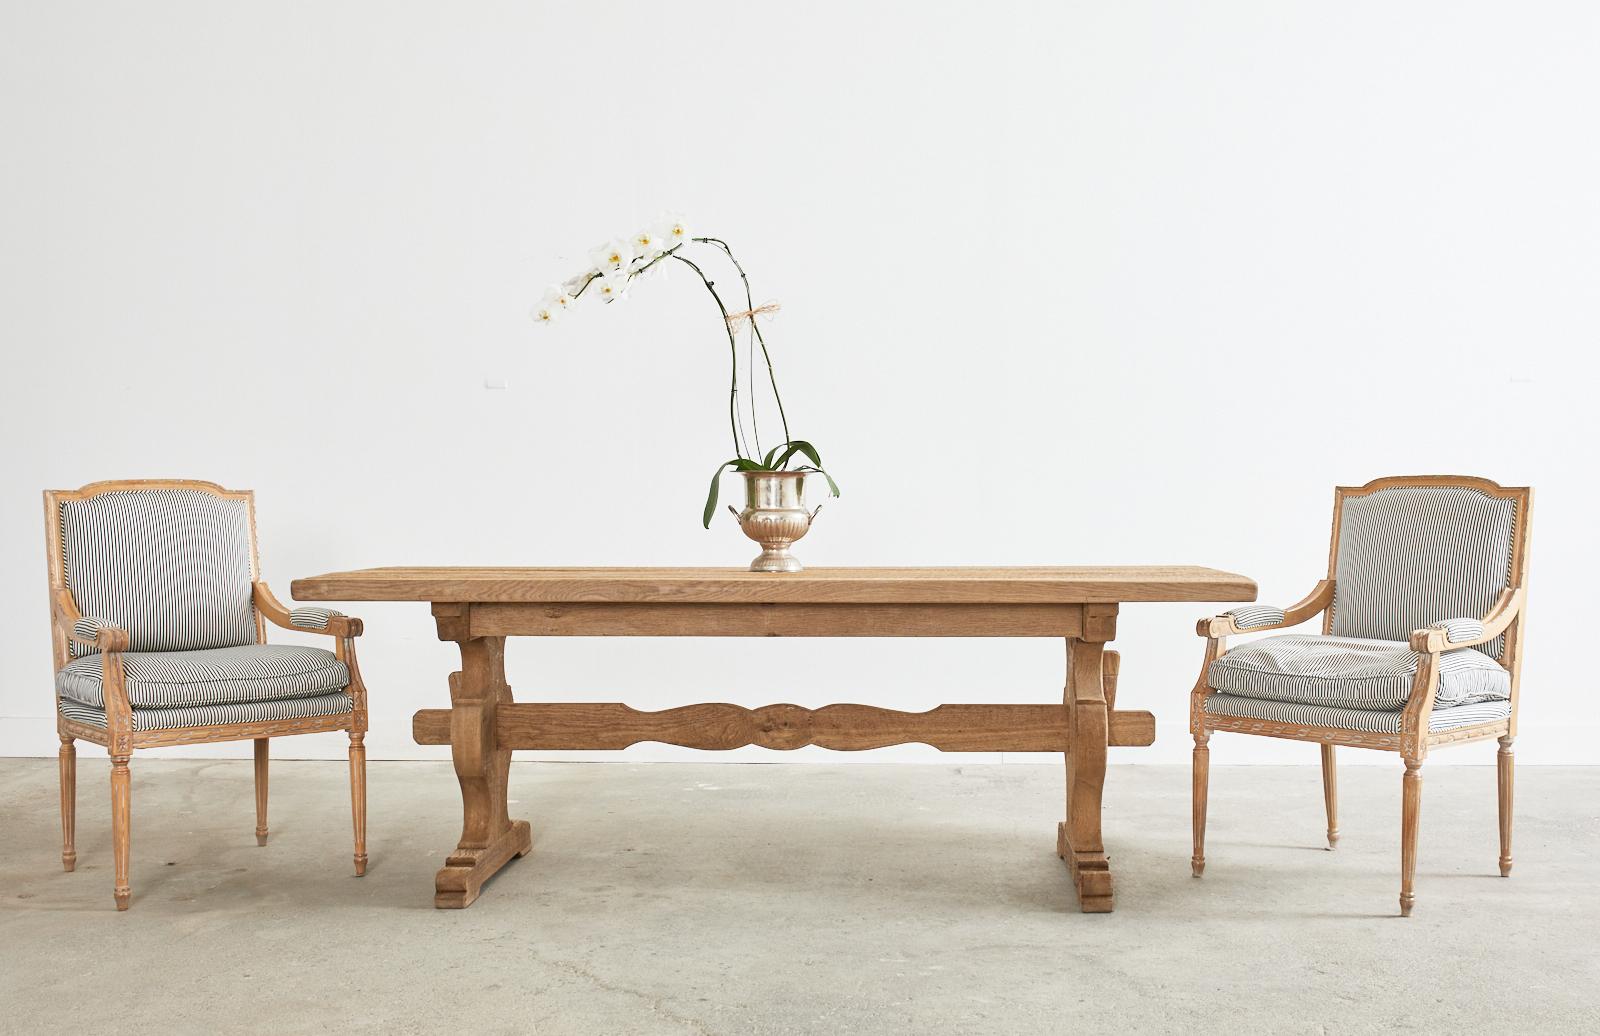 Impressive country French provincial farmhouse dining table featuring a bleached oak finish. The rectangular plank top is 2